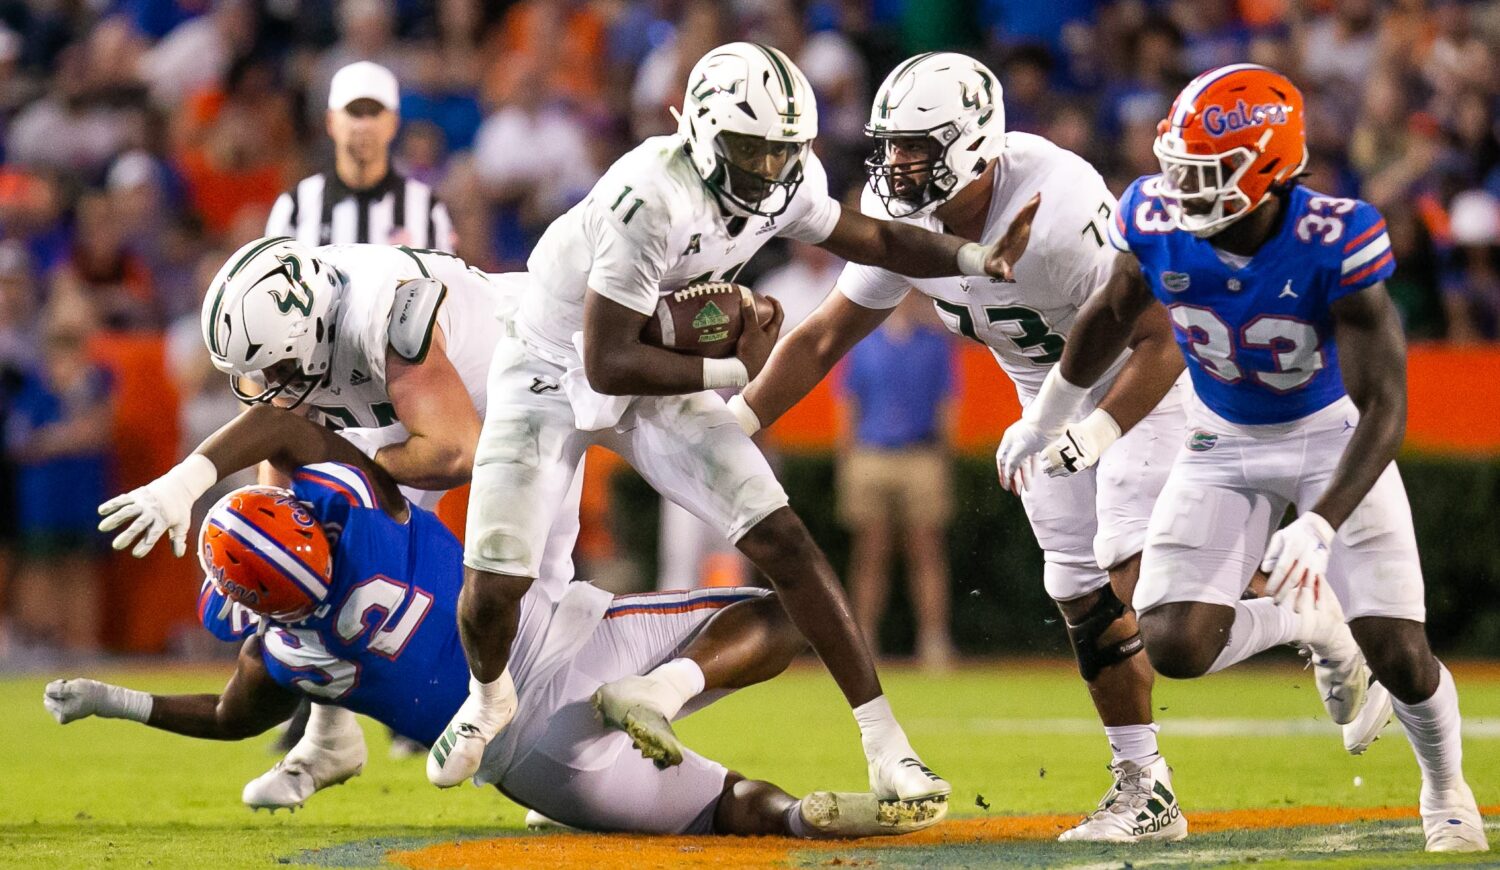 South Florida Bulls quarterback Gerry Bohanon (11) tries to elude Florida Gators in the second half against the Bulls at Steve Spurrier Field at Ben Hill Griffin Stadium in Gainesville, FL on Saturday, September 17, 2022.